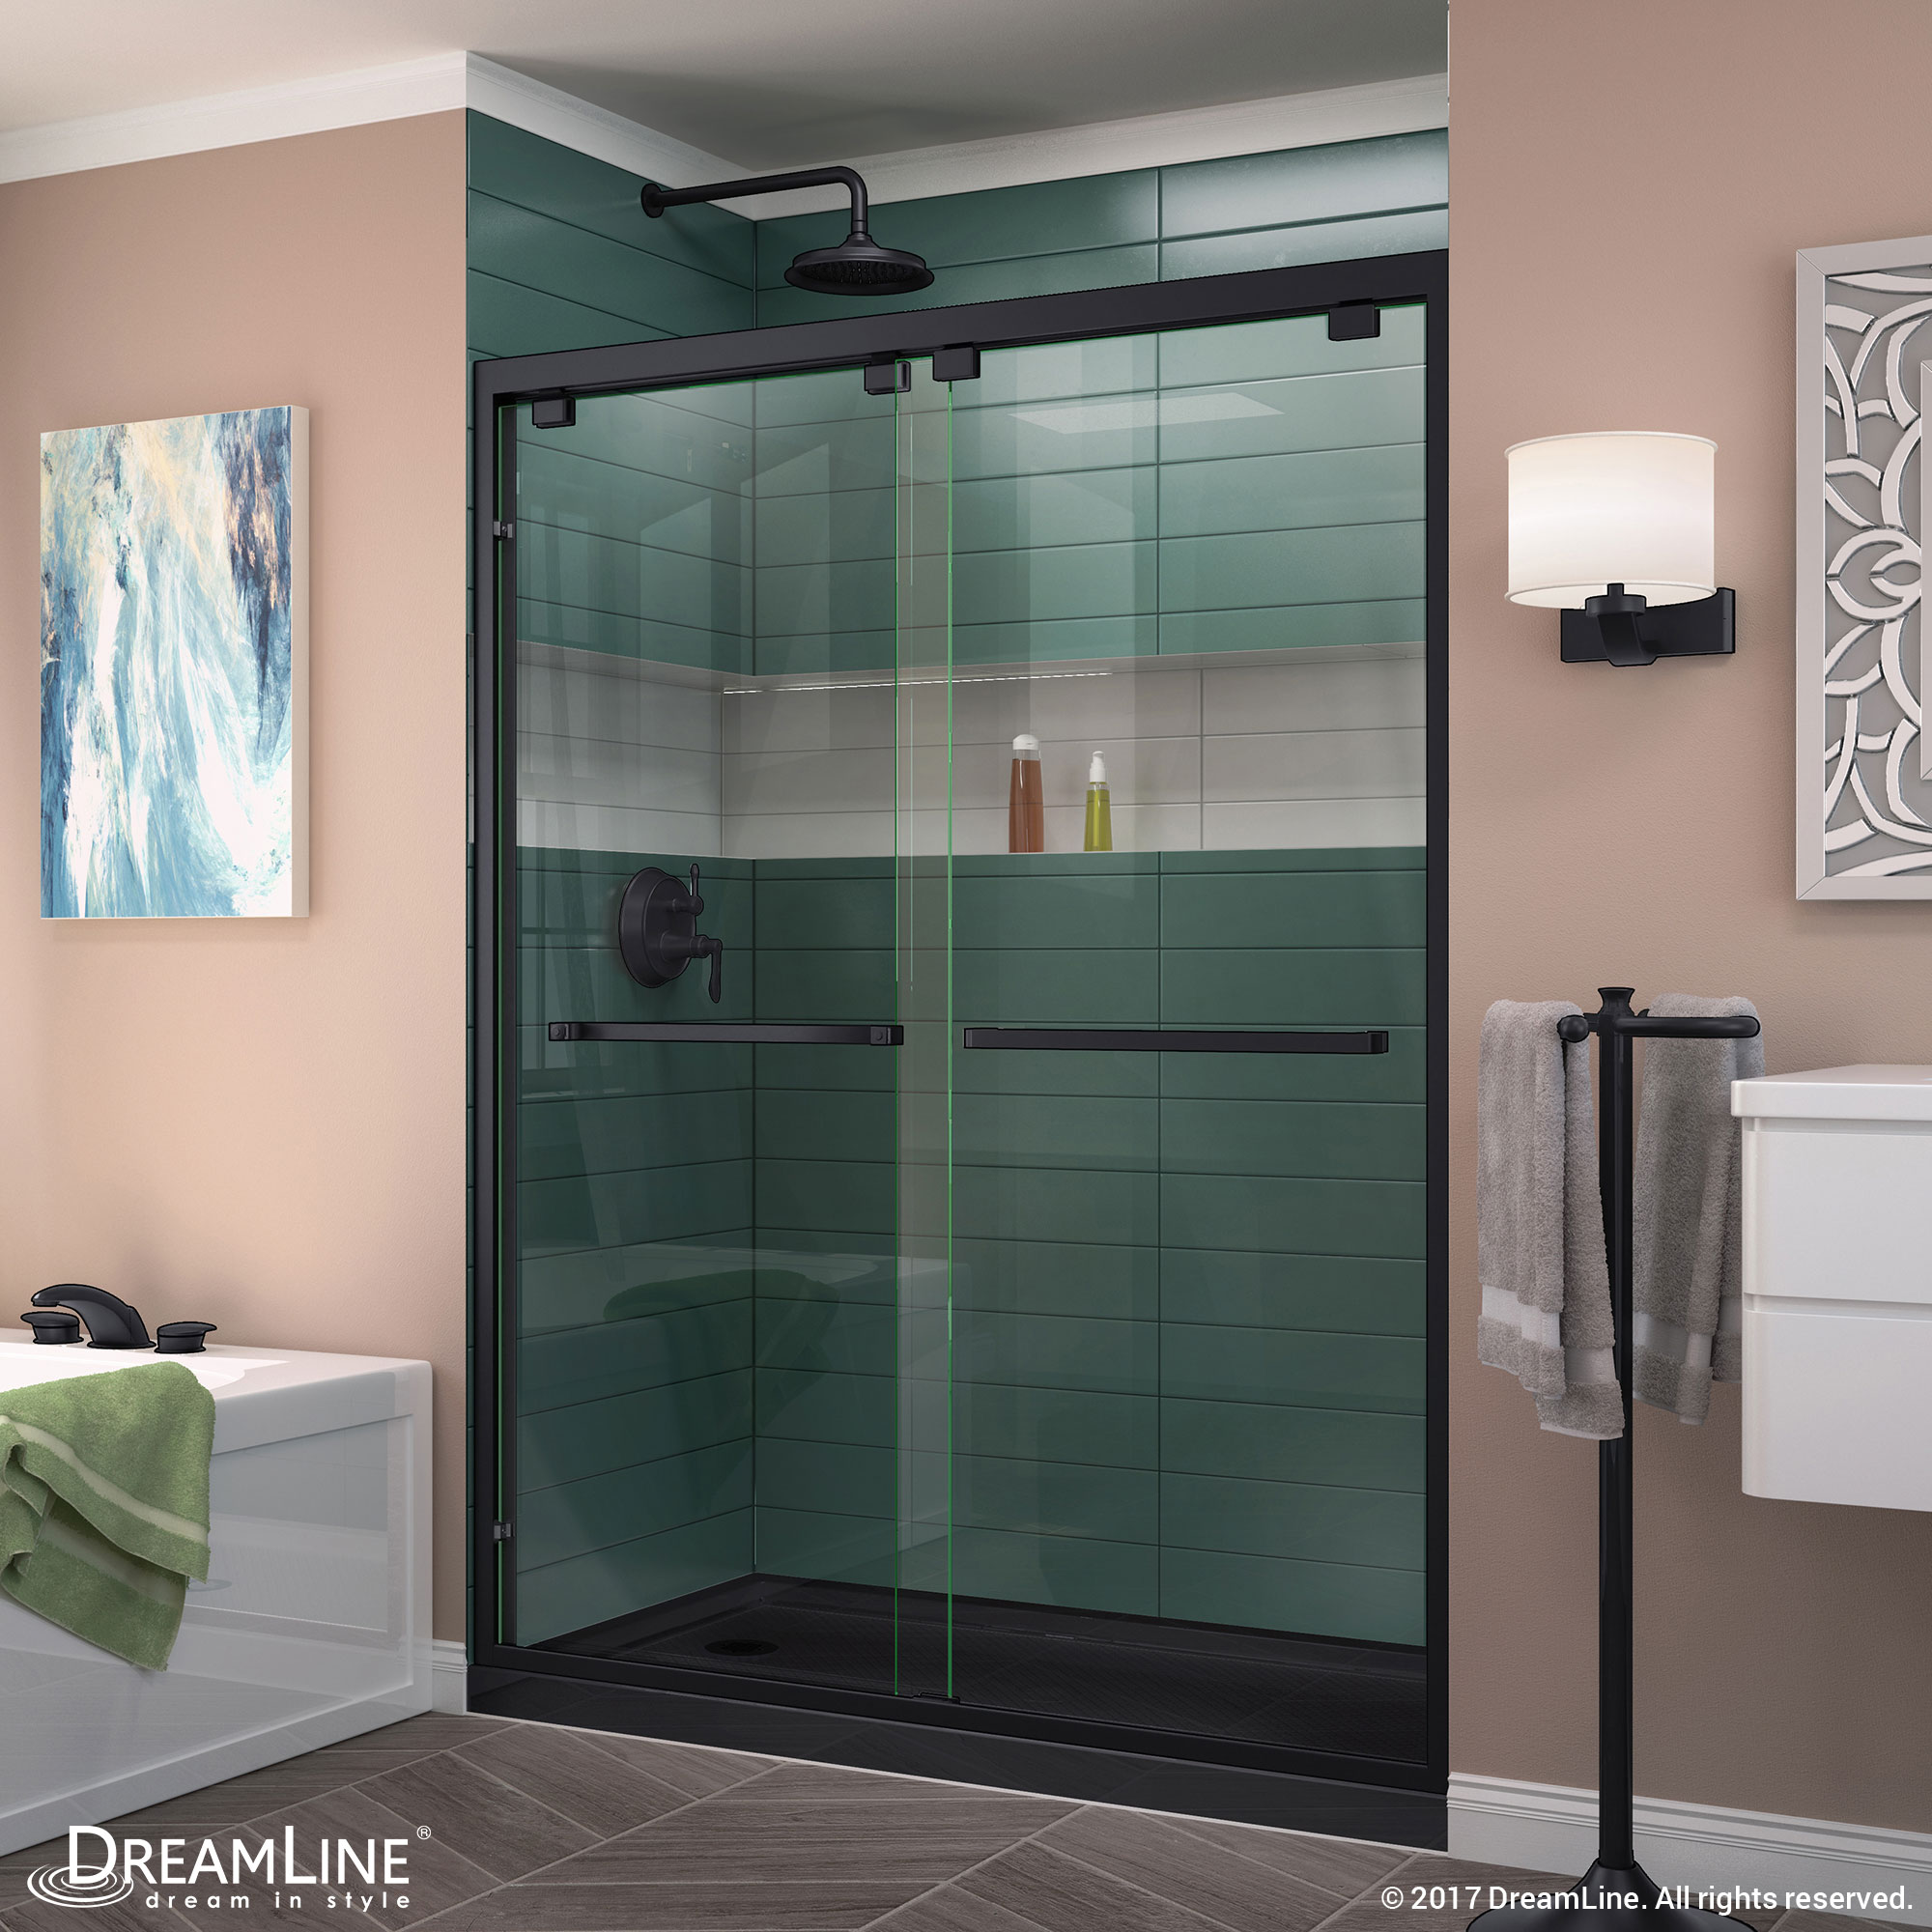 DreamLine Encore 30 in. D x 60 in. W x 78 3/4 in. H Bypass Shower Door in Chrome and Left Drain Black Base Kit